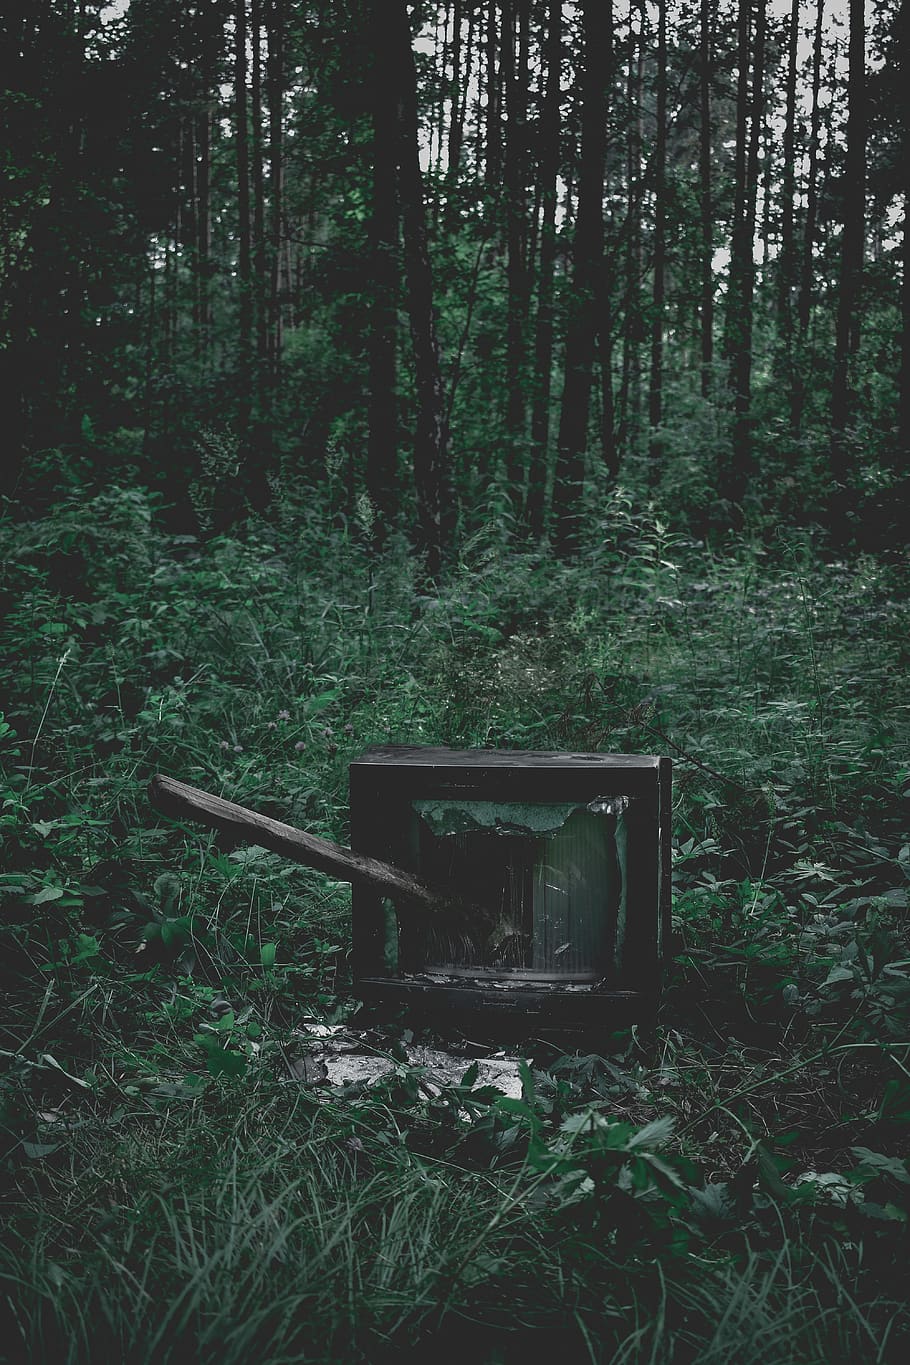 A television sits in the middle of a forest. - Dark green, aqua, jungle